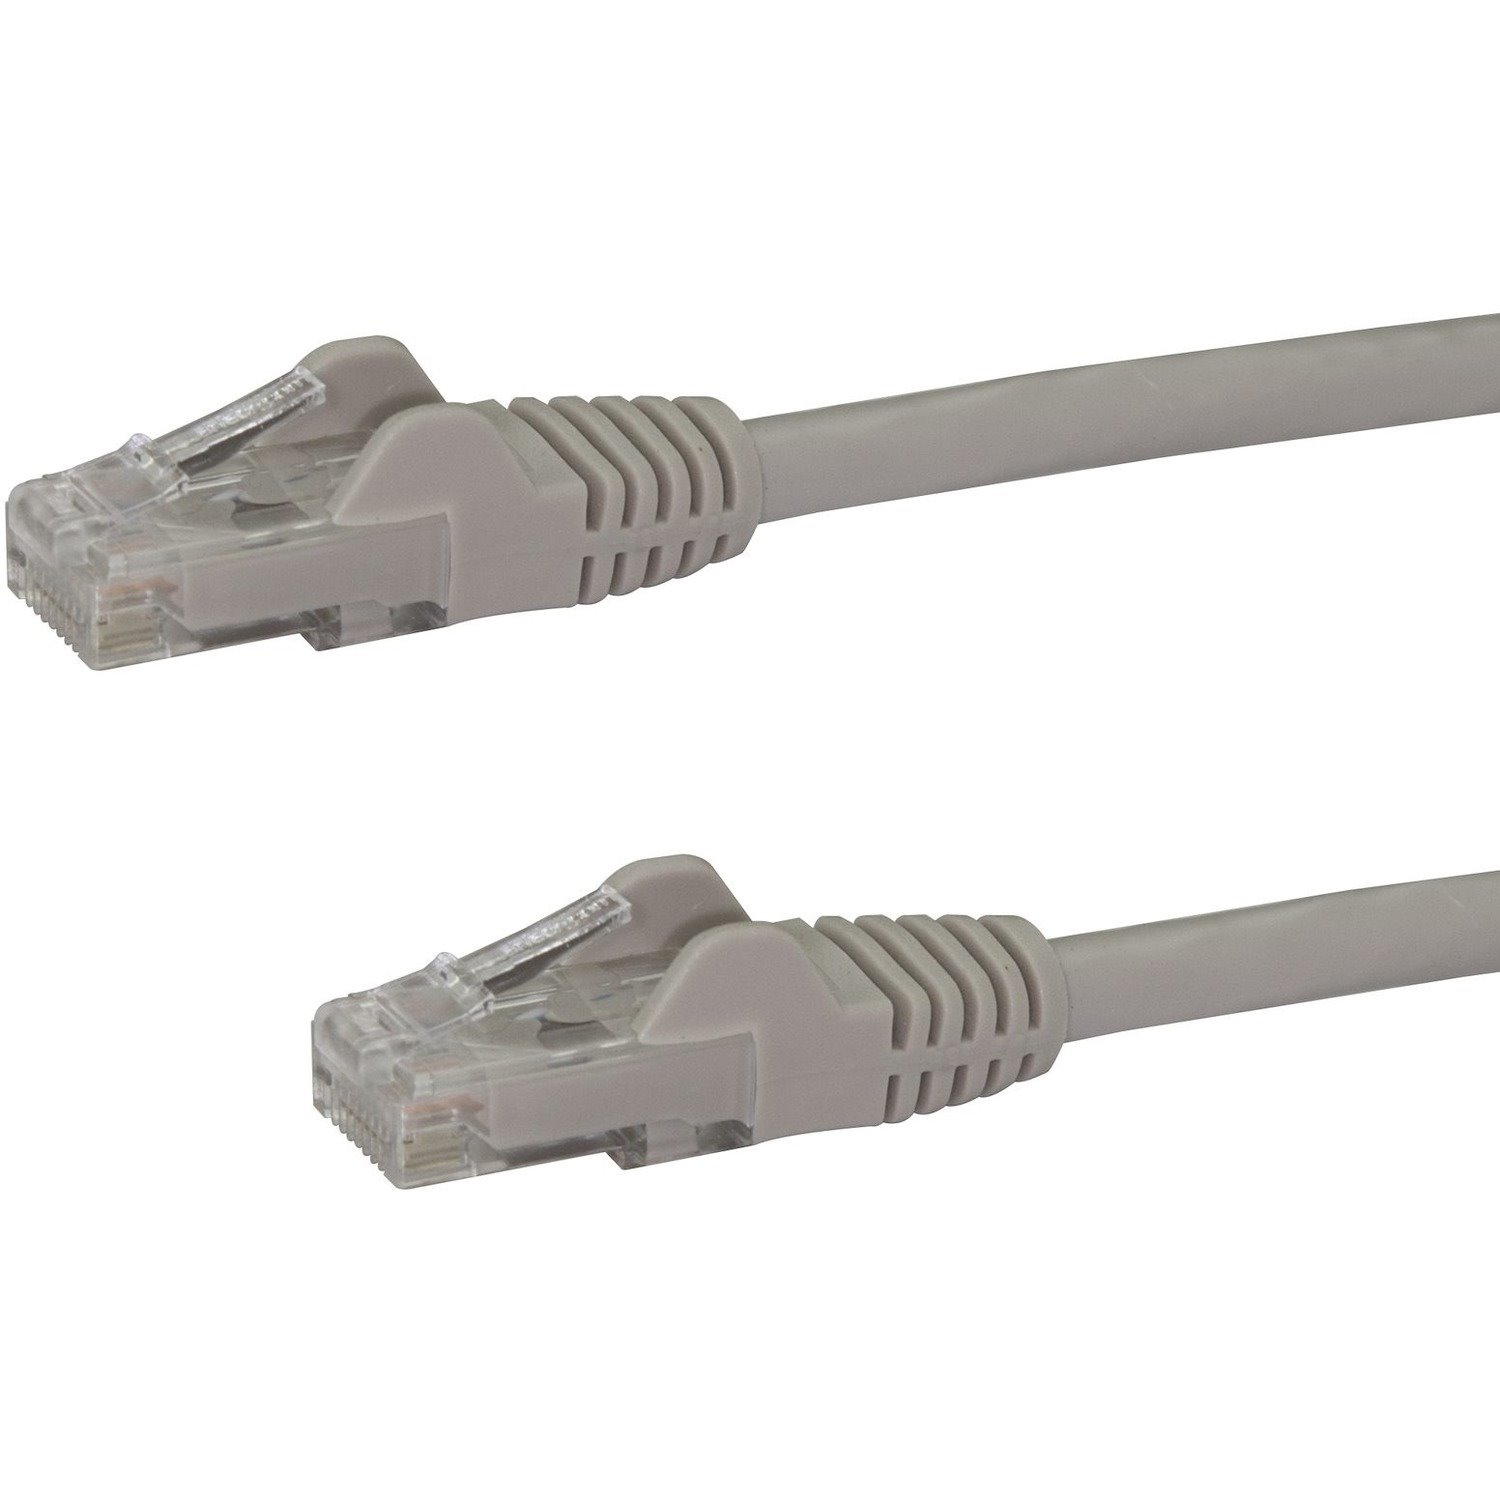 StarTech.com 10m CAT6 Ethernet Cable - Grey Snagless Gigabit - 100W PoE UTP 650MHz Category 6 Patch Cord UL Certified Wiring/TIA